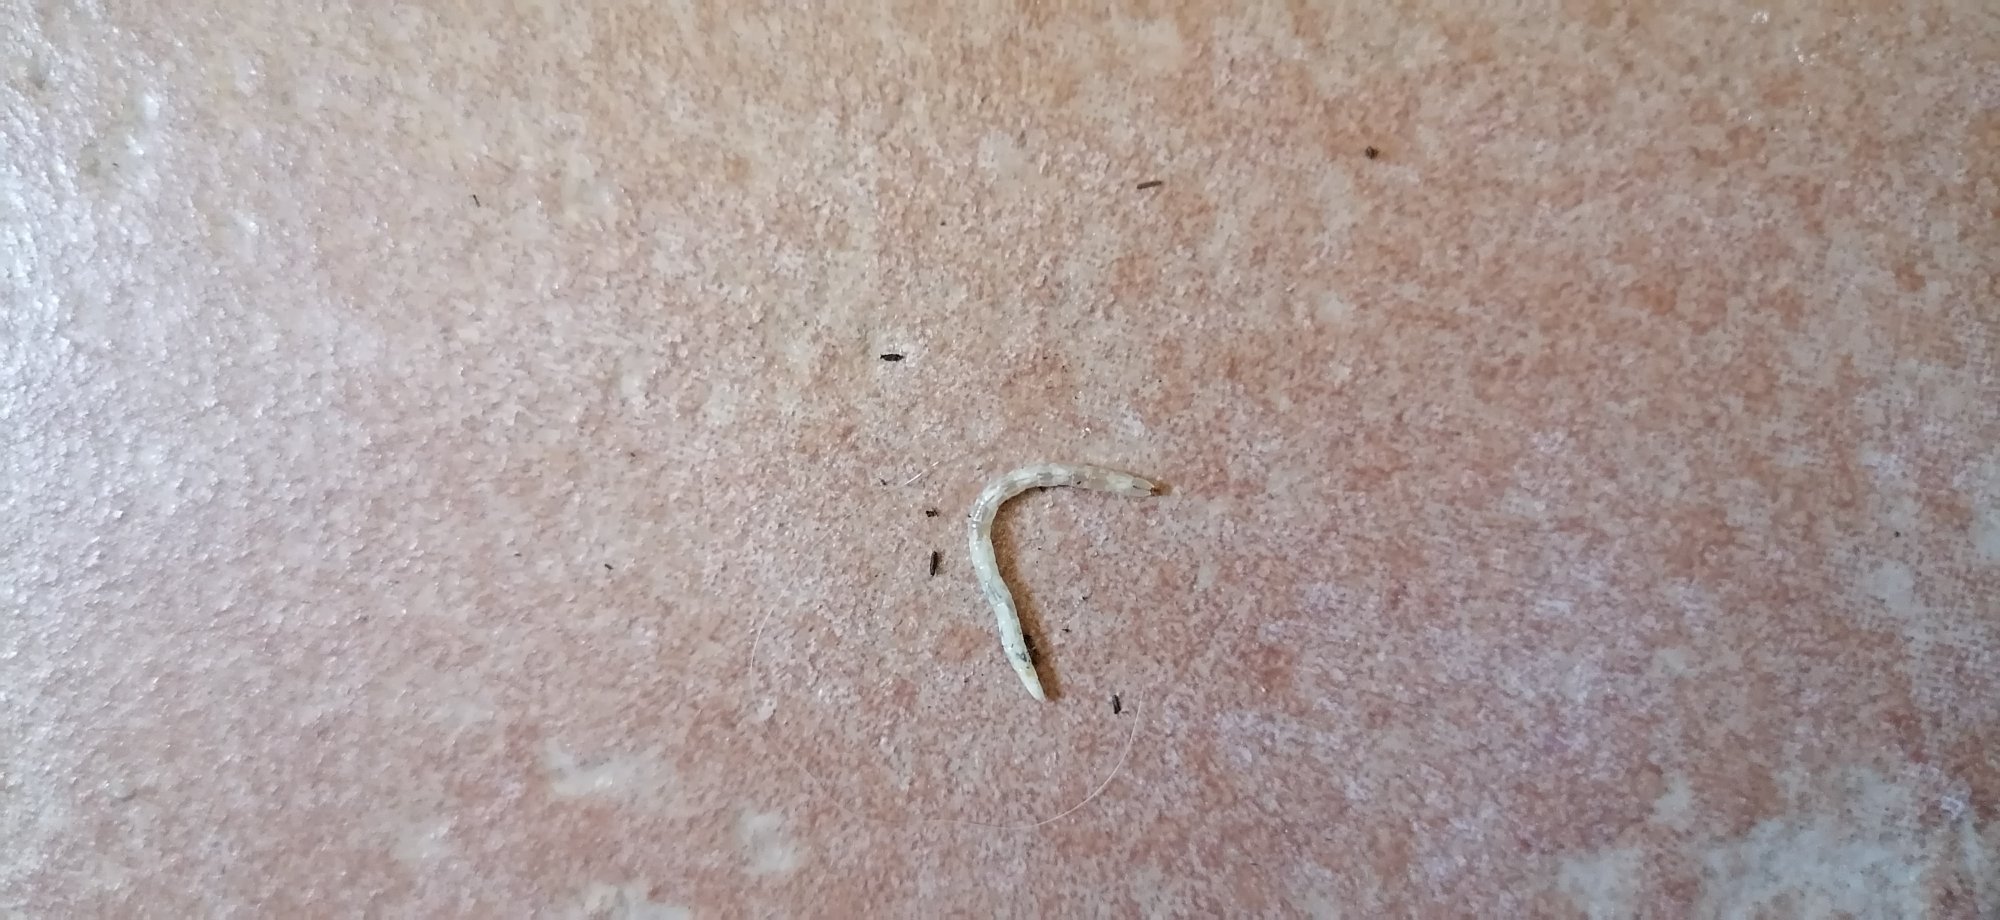 White worms on soilgood or bad